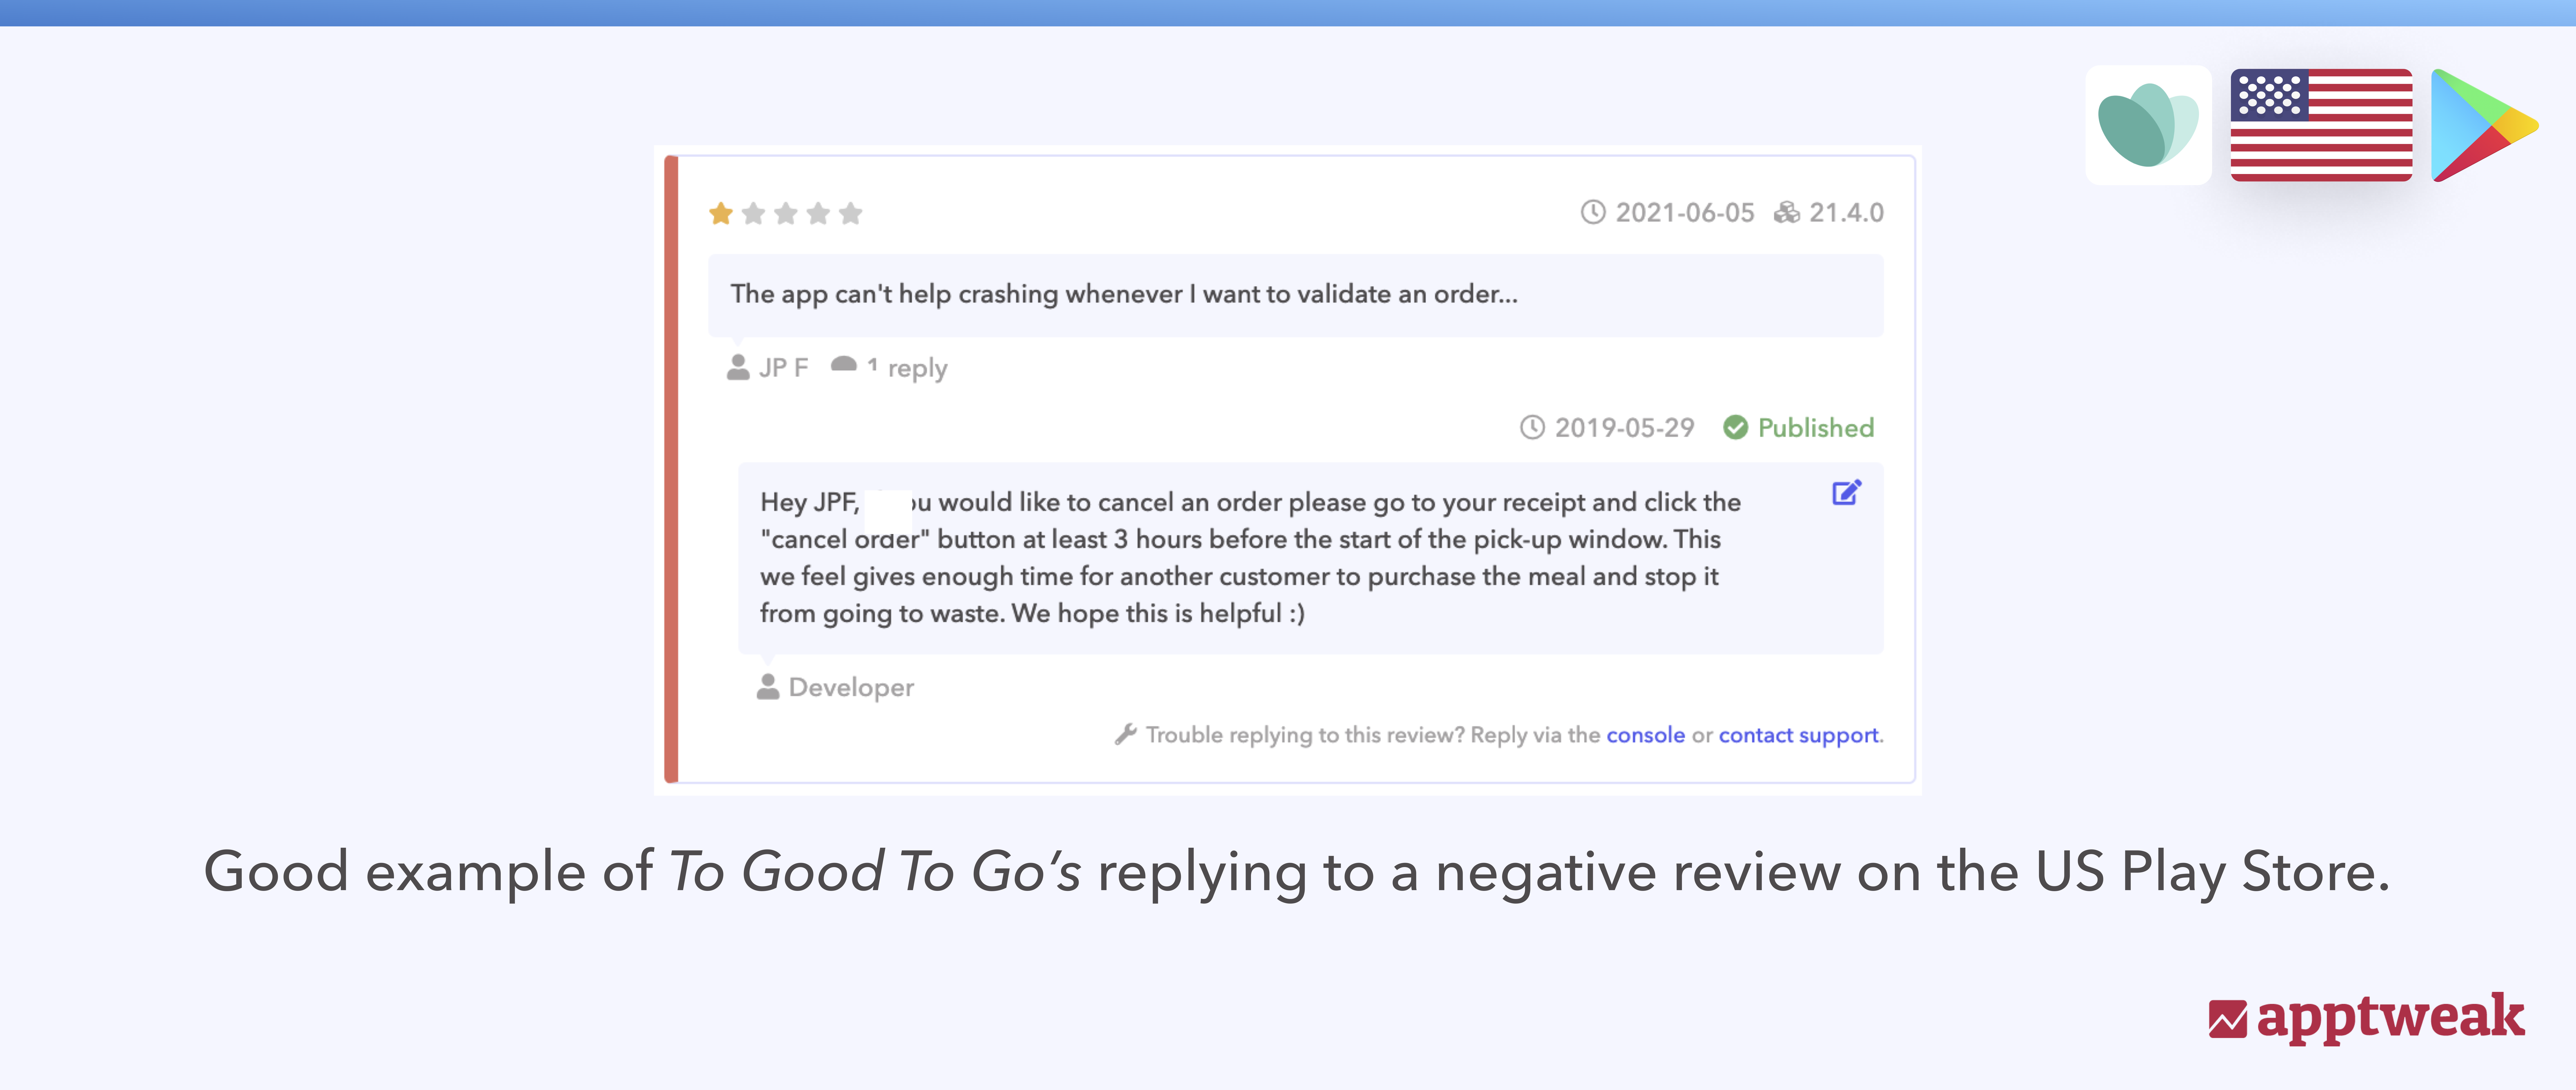 Good example of Too Good To Go replying to a negative review